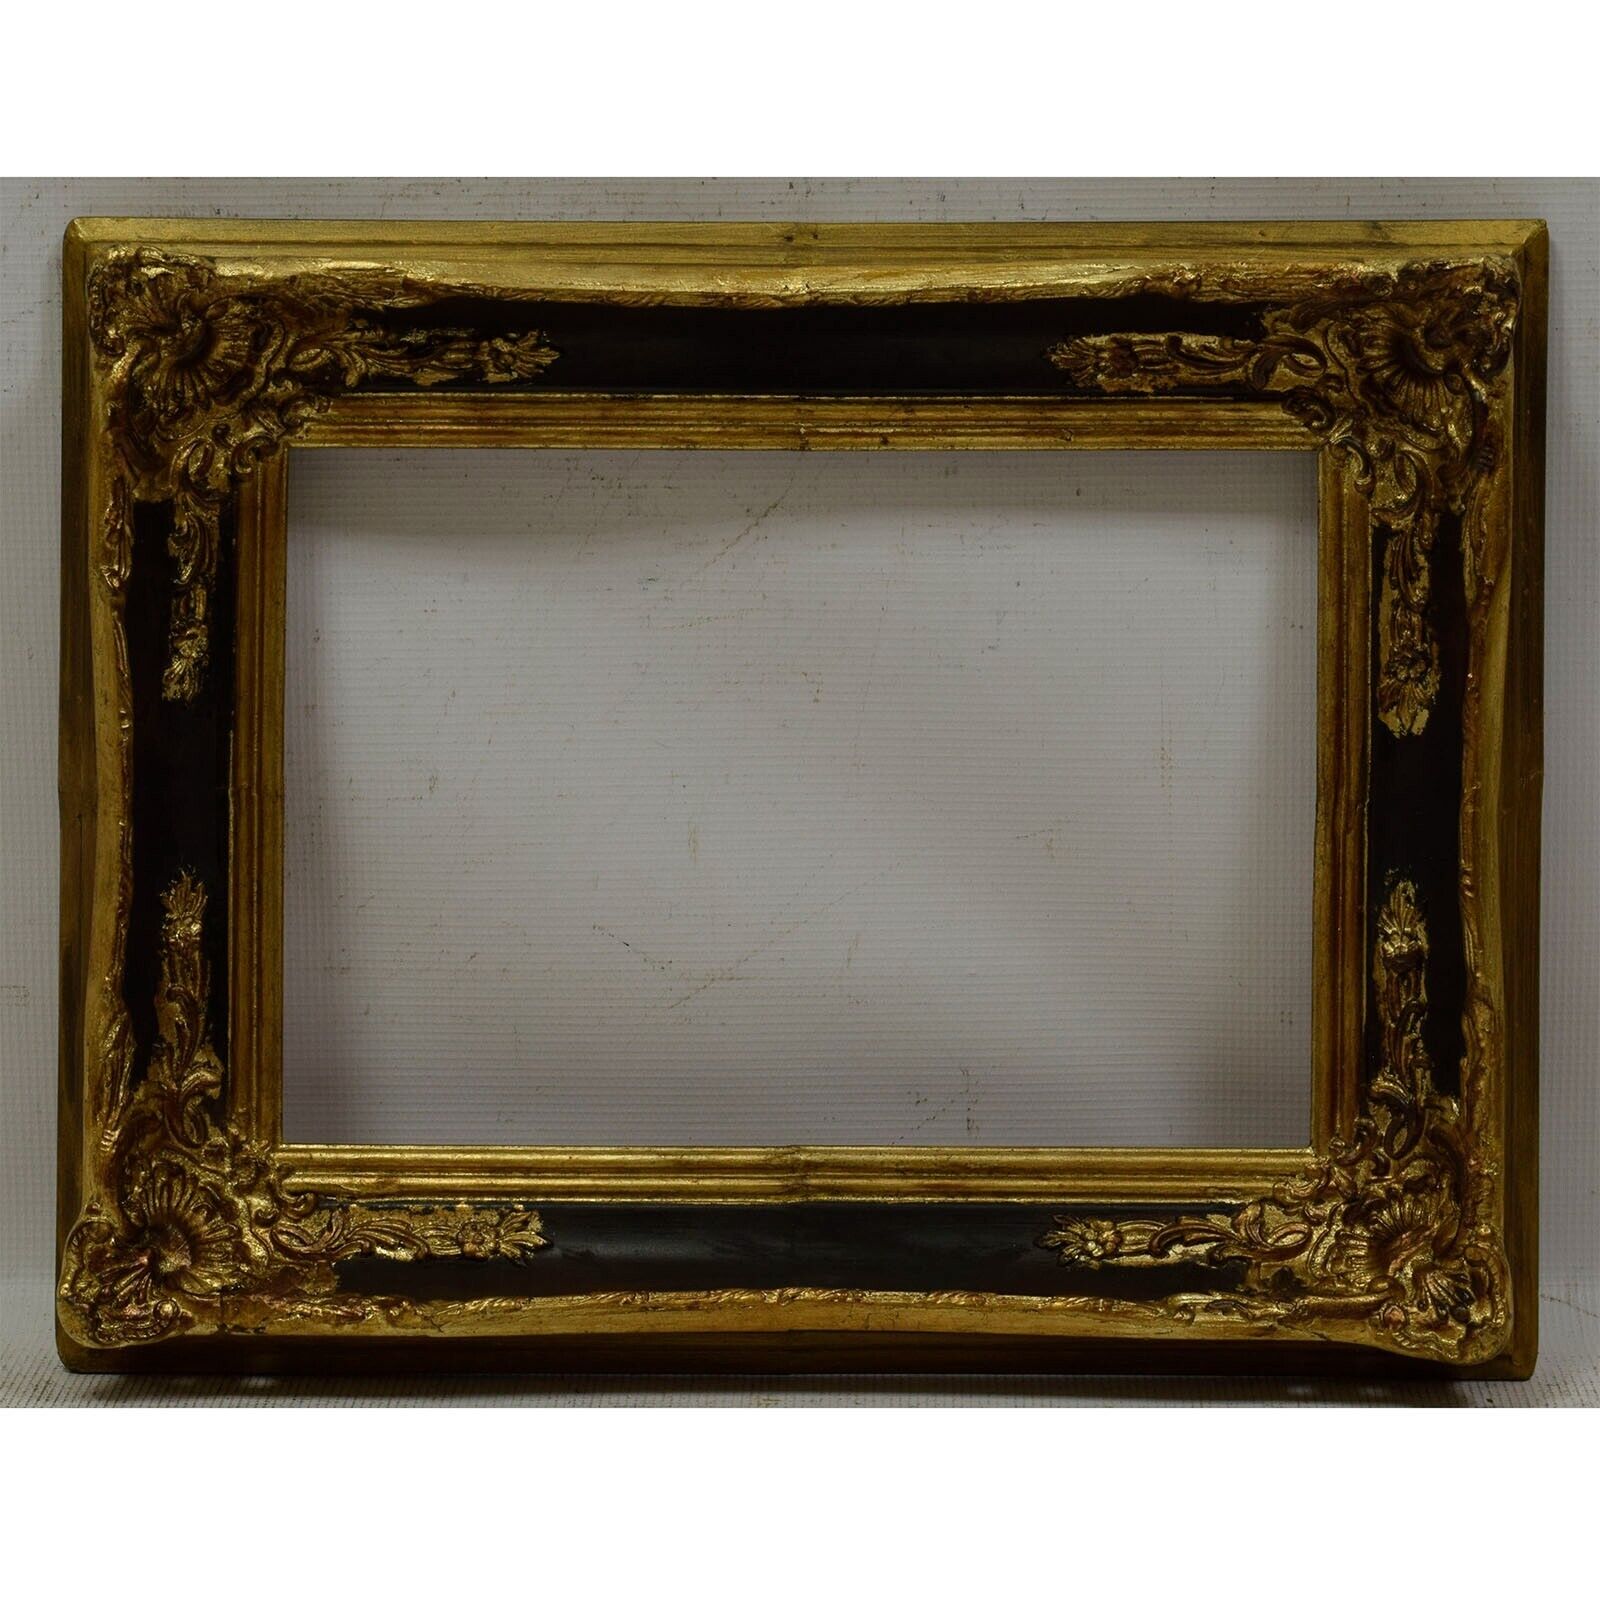 Ca. 1850-1900 Old frame with metal leaf and gold painted Internal: 13.8 x 9.4 in